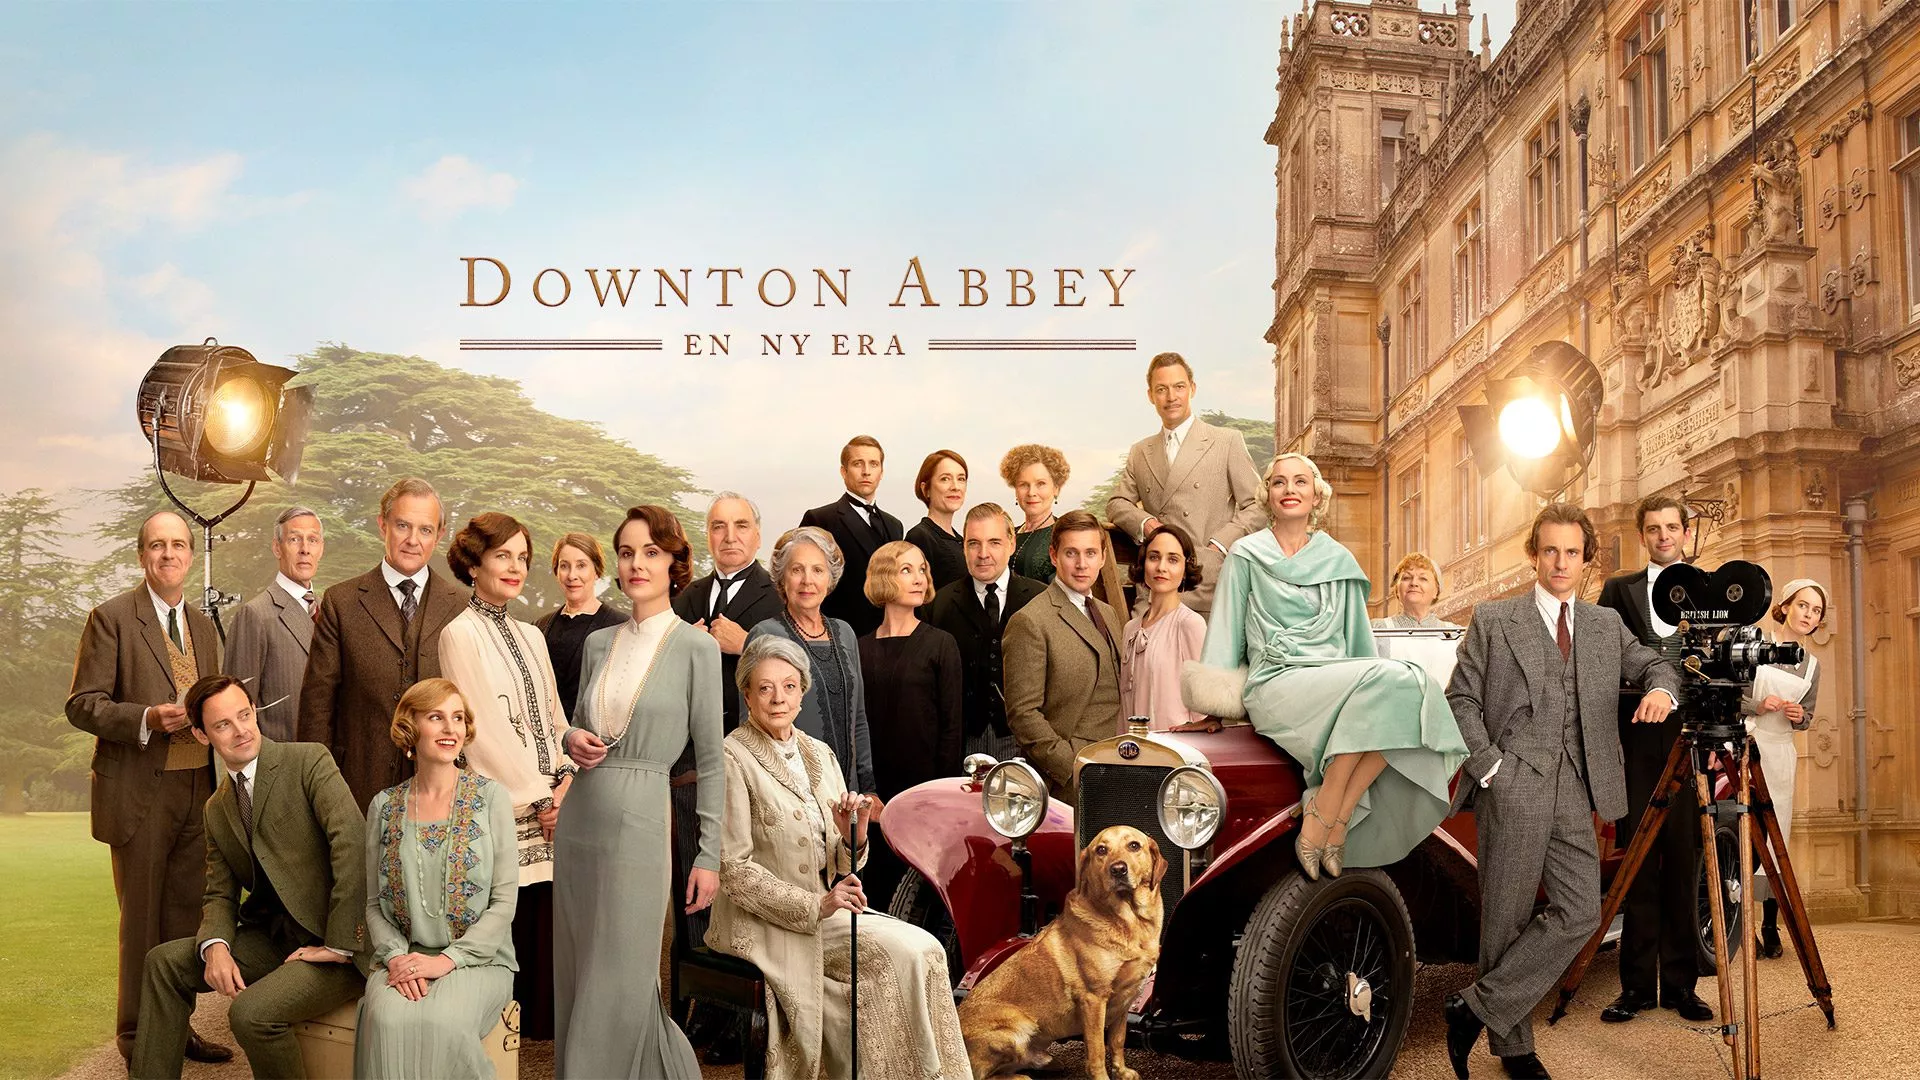 DOWNTON ABBEY: A NEW ERA - Official Trailer [HD] - Only in Theaters May 20